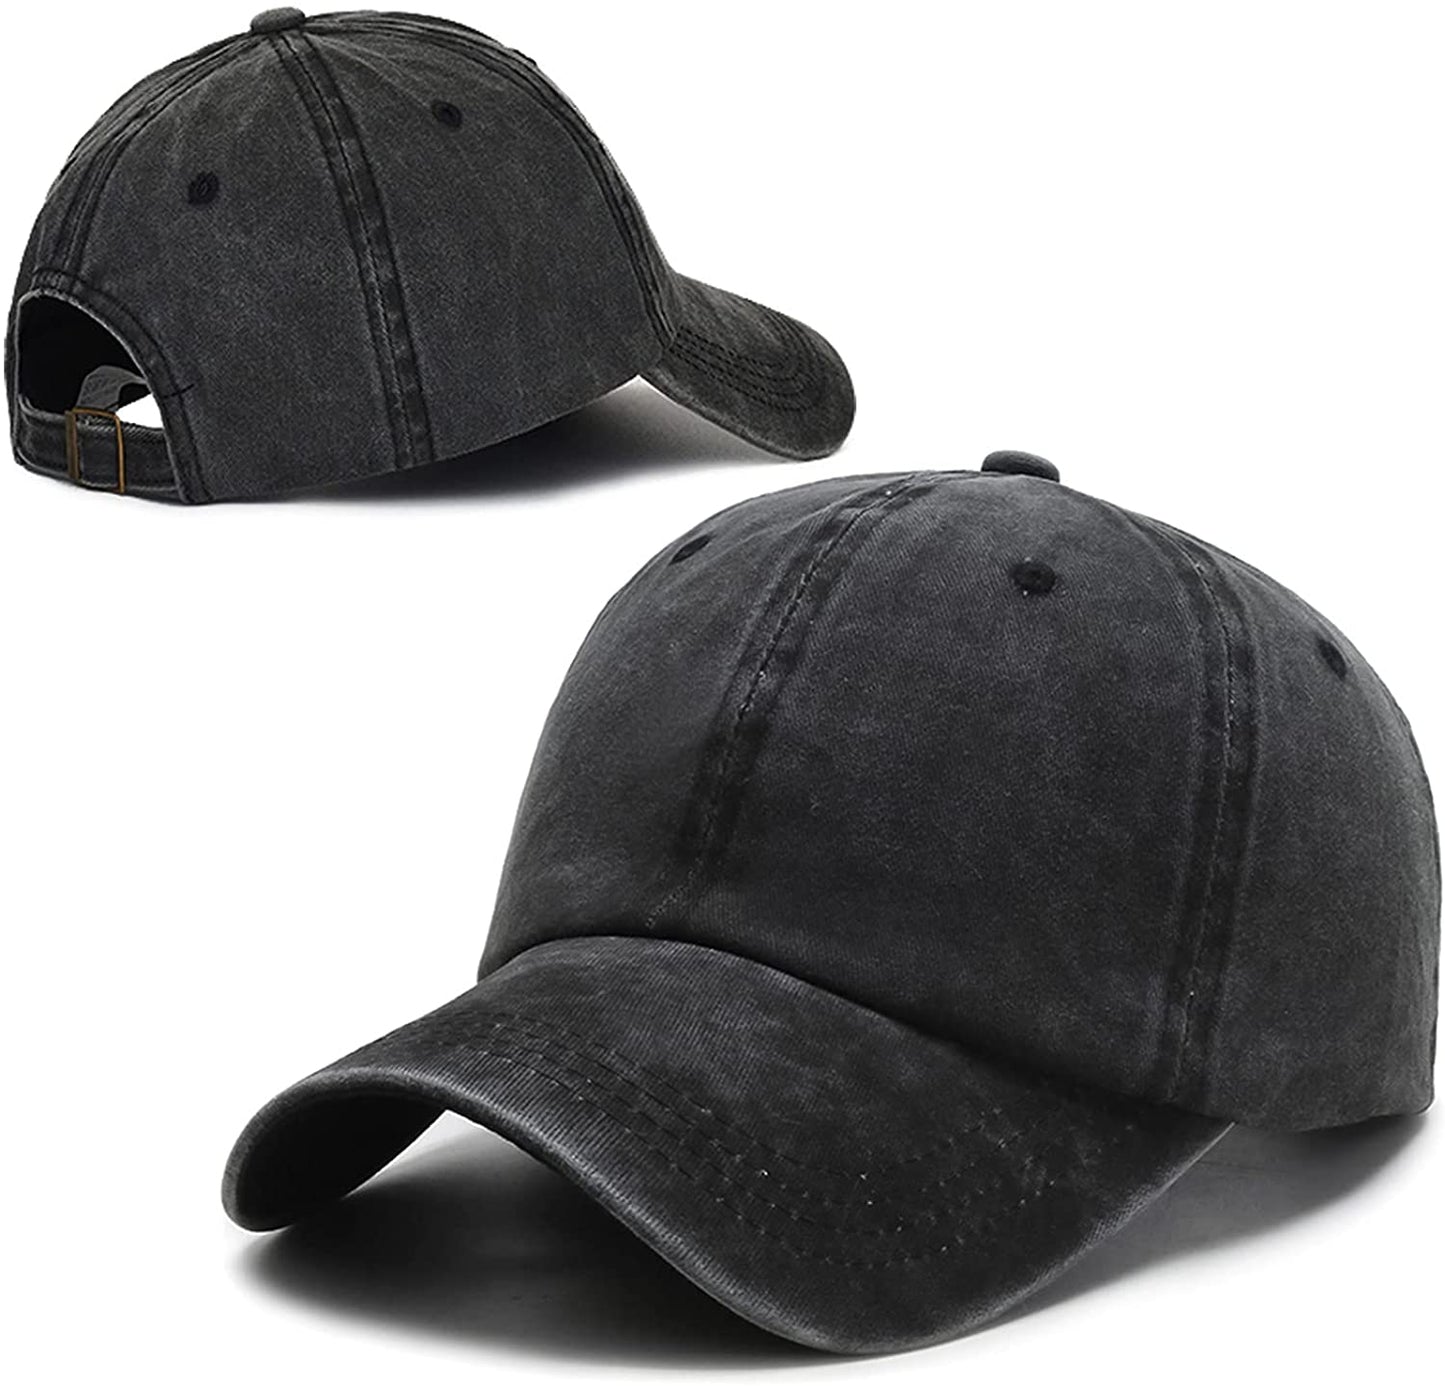 Christian Denim Baseball Cap With Jesus Saved My Life Embroidery for Men and Women - Washed Cotton